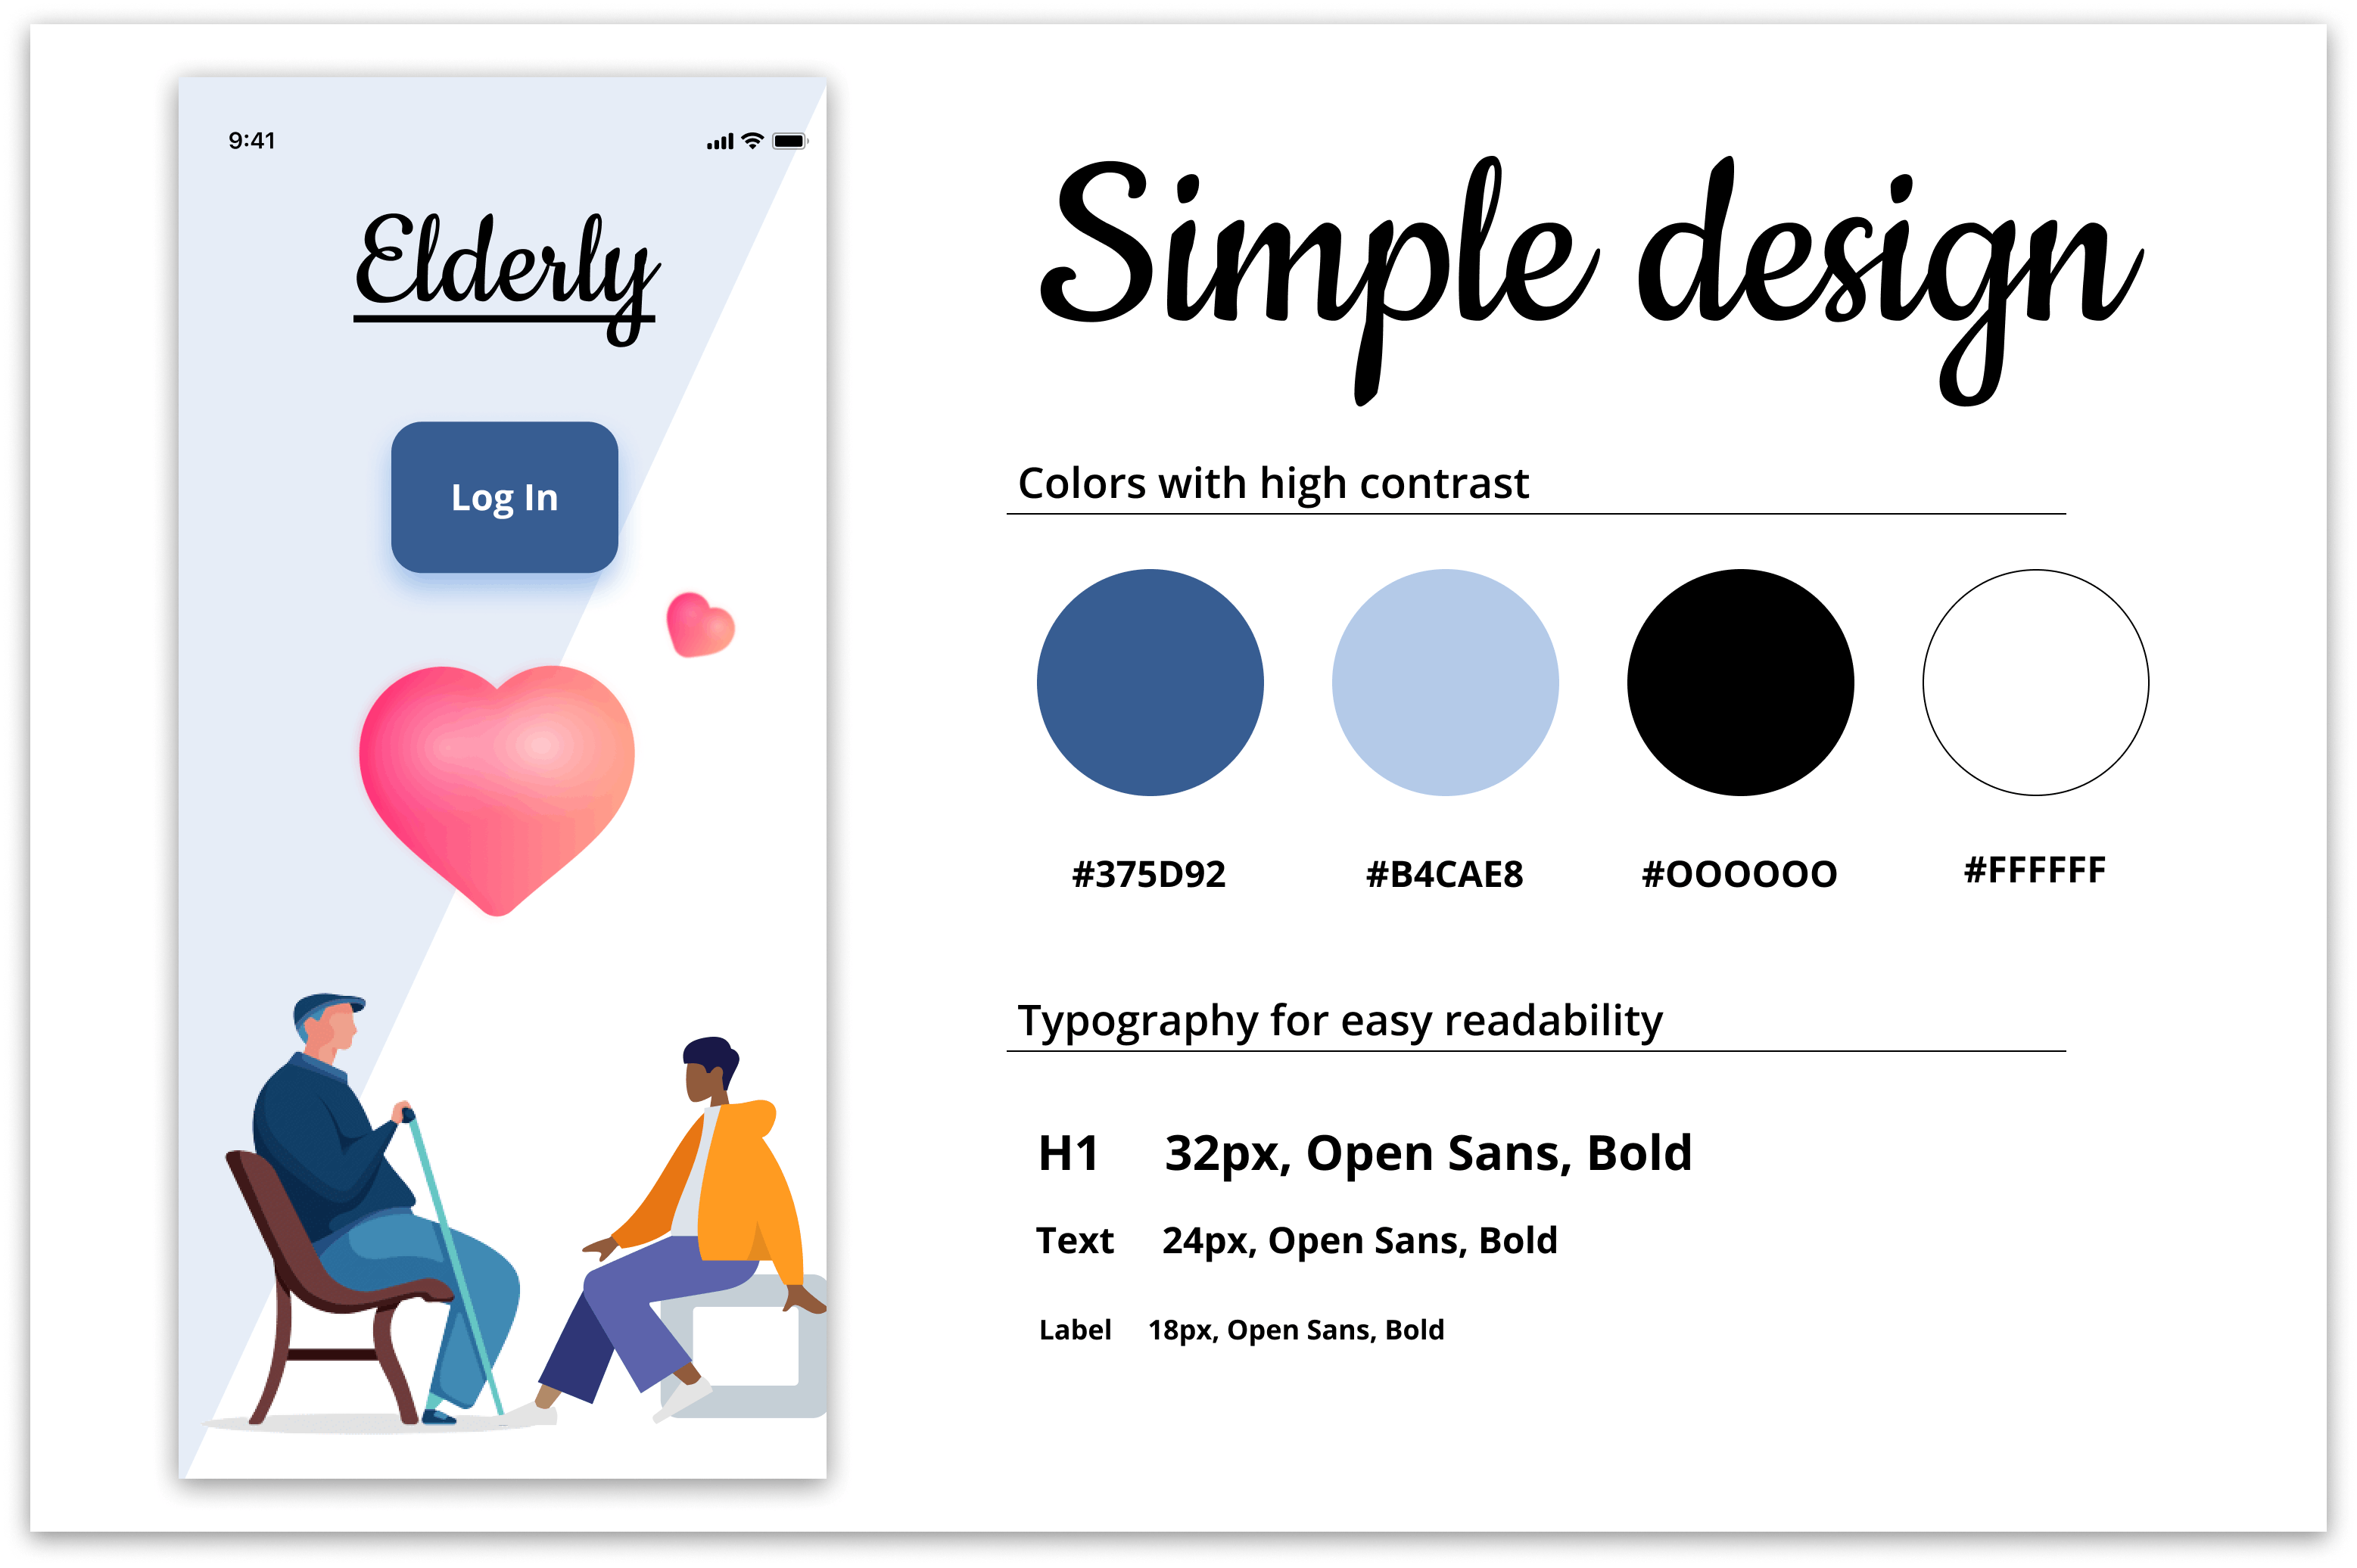 Explanation of simple design regarding color, typography and iconography with accessibility in mind